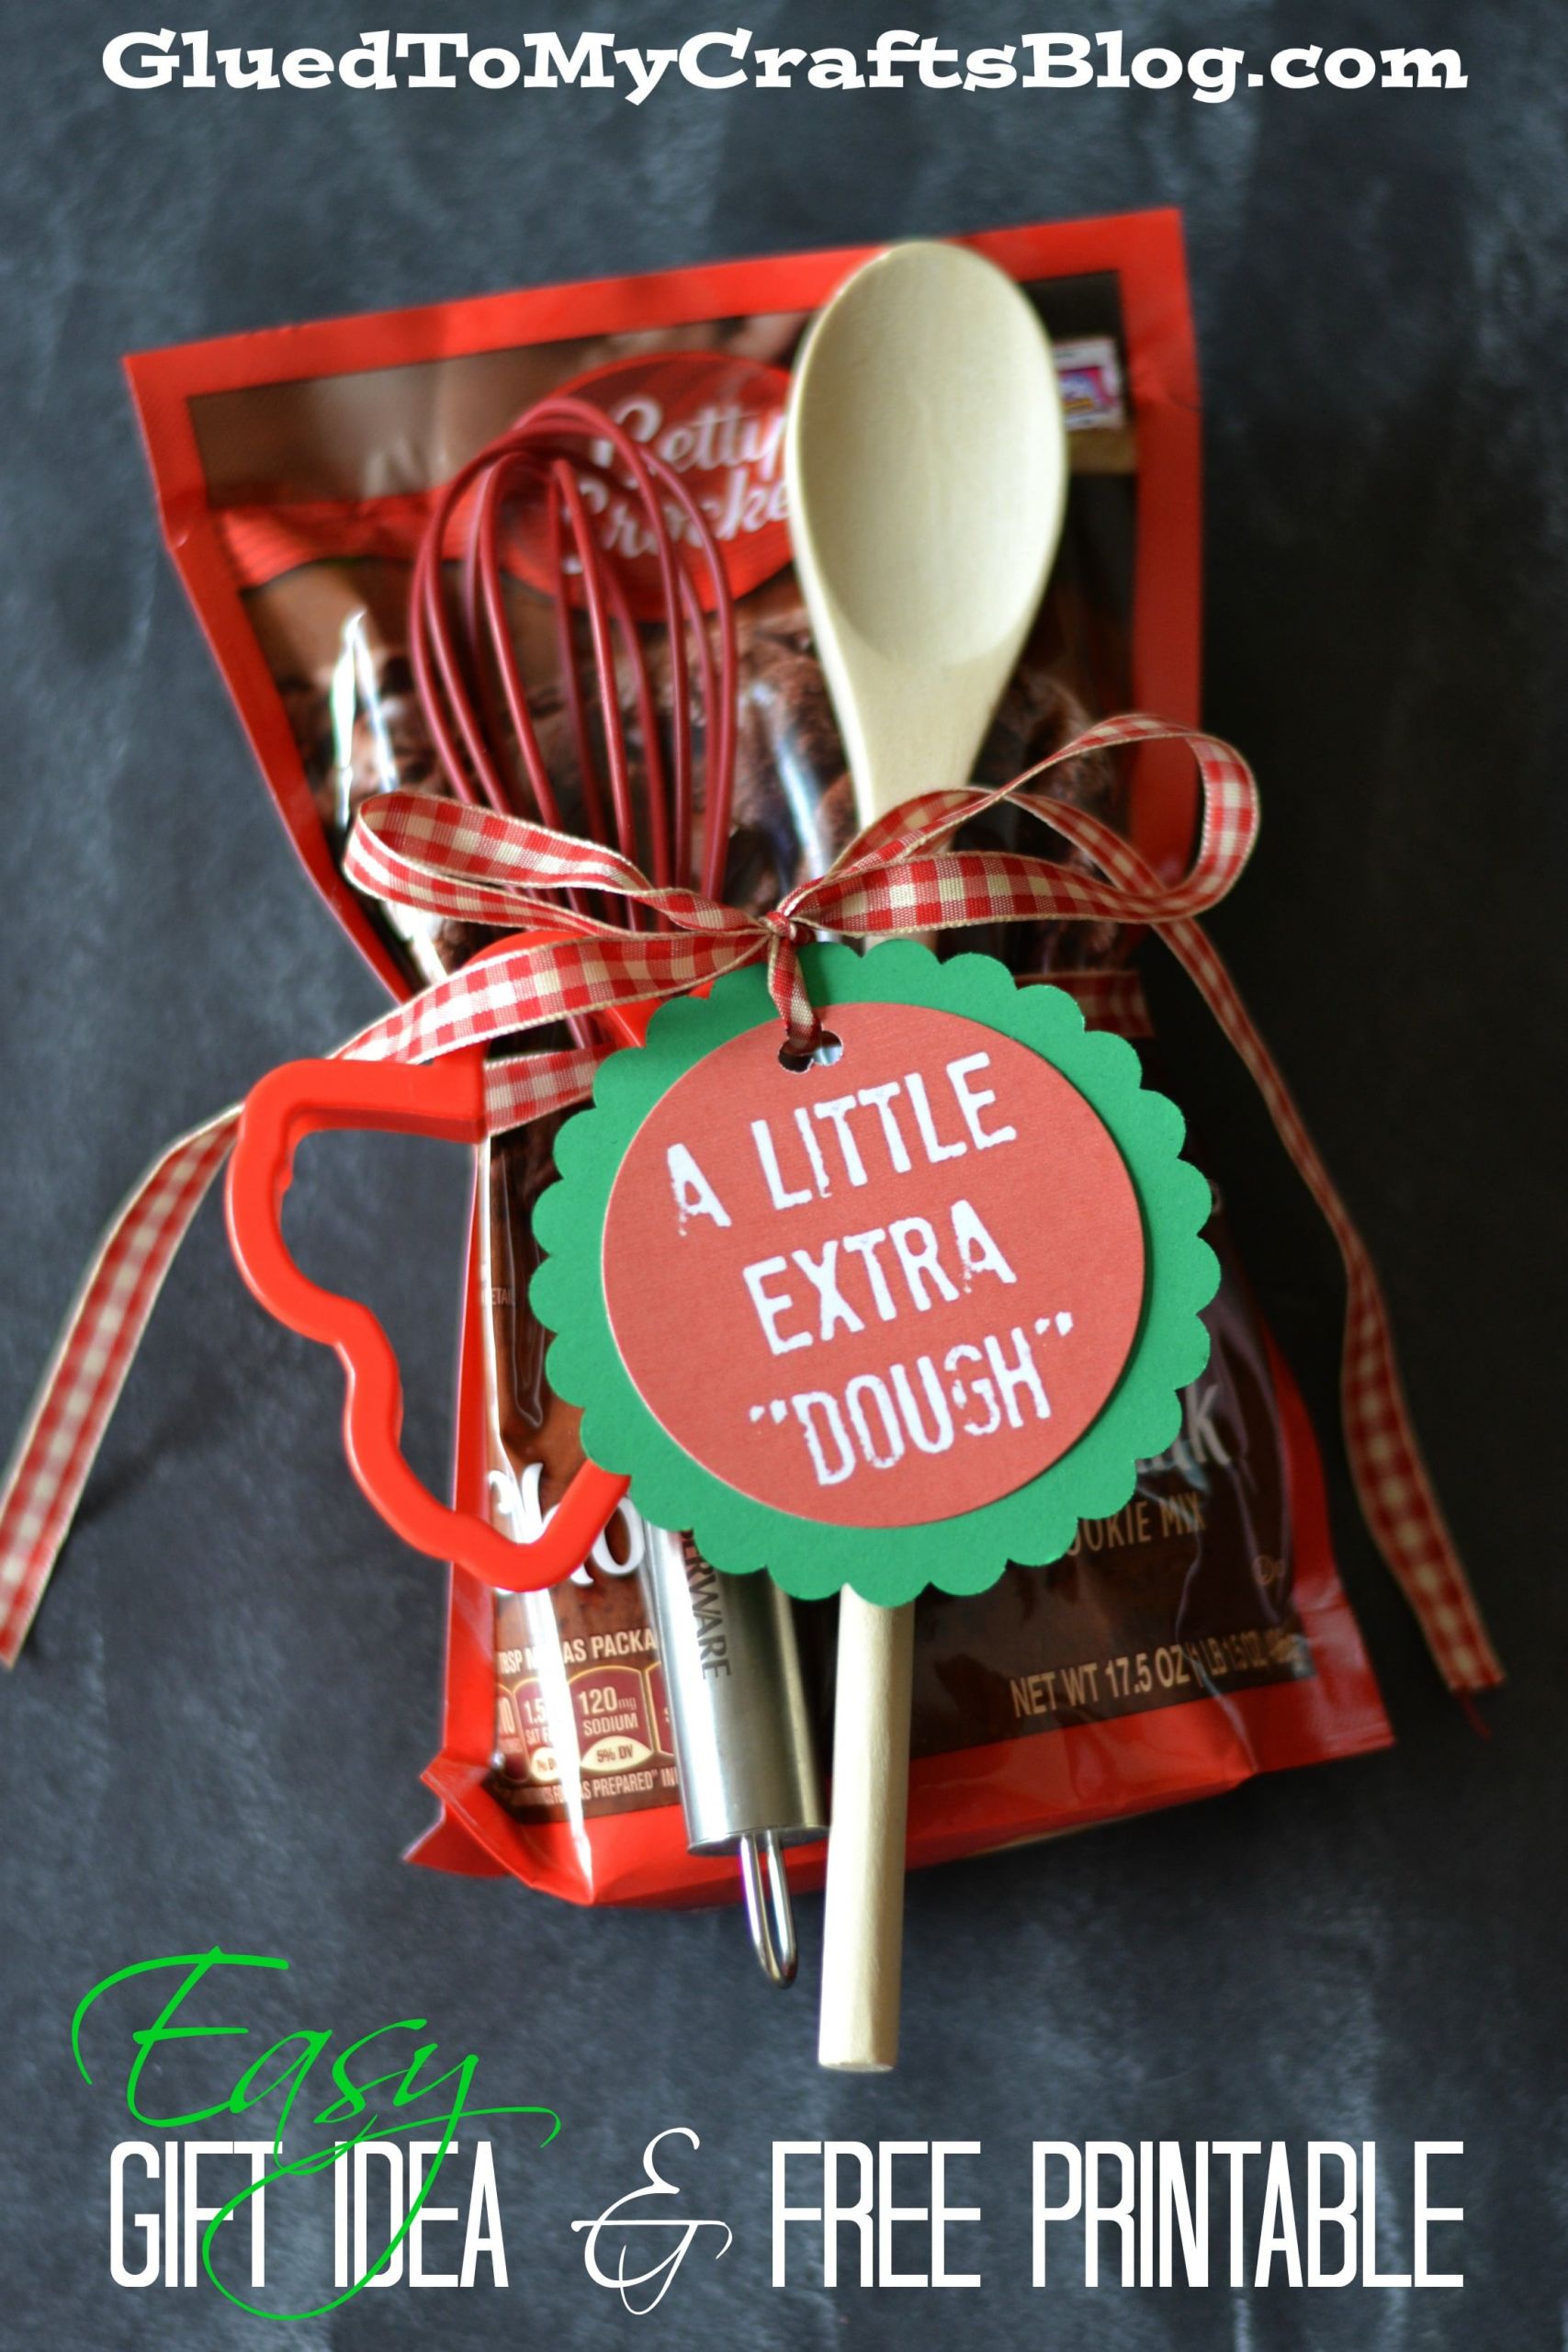 Staff Holiday Gift Ideas
 Easy Gift Idea & Free Printable